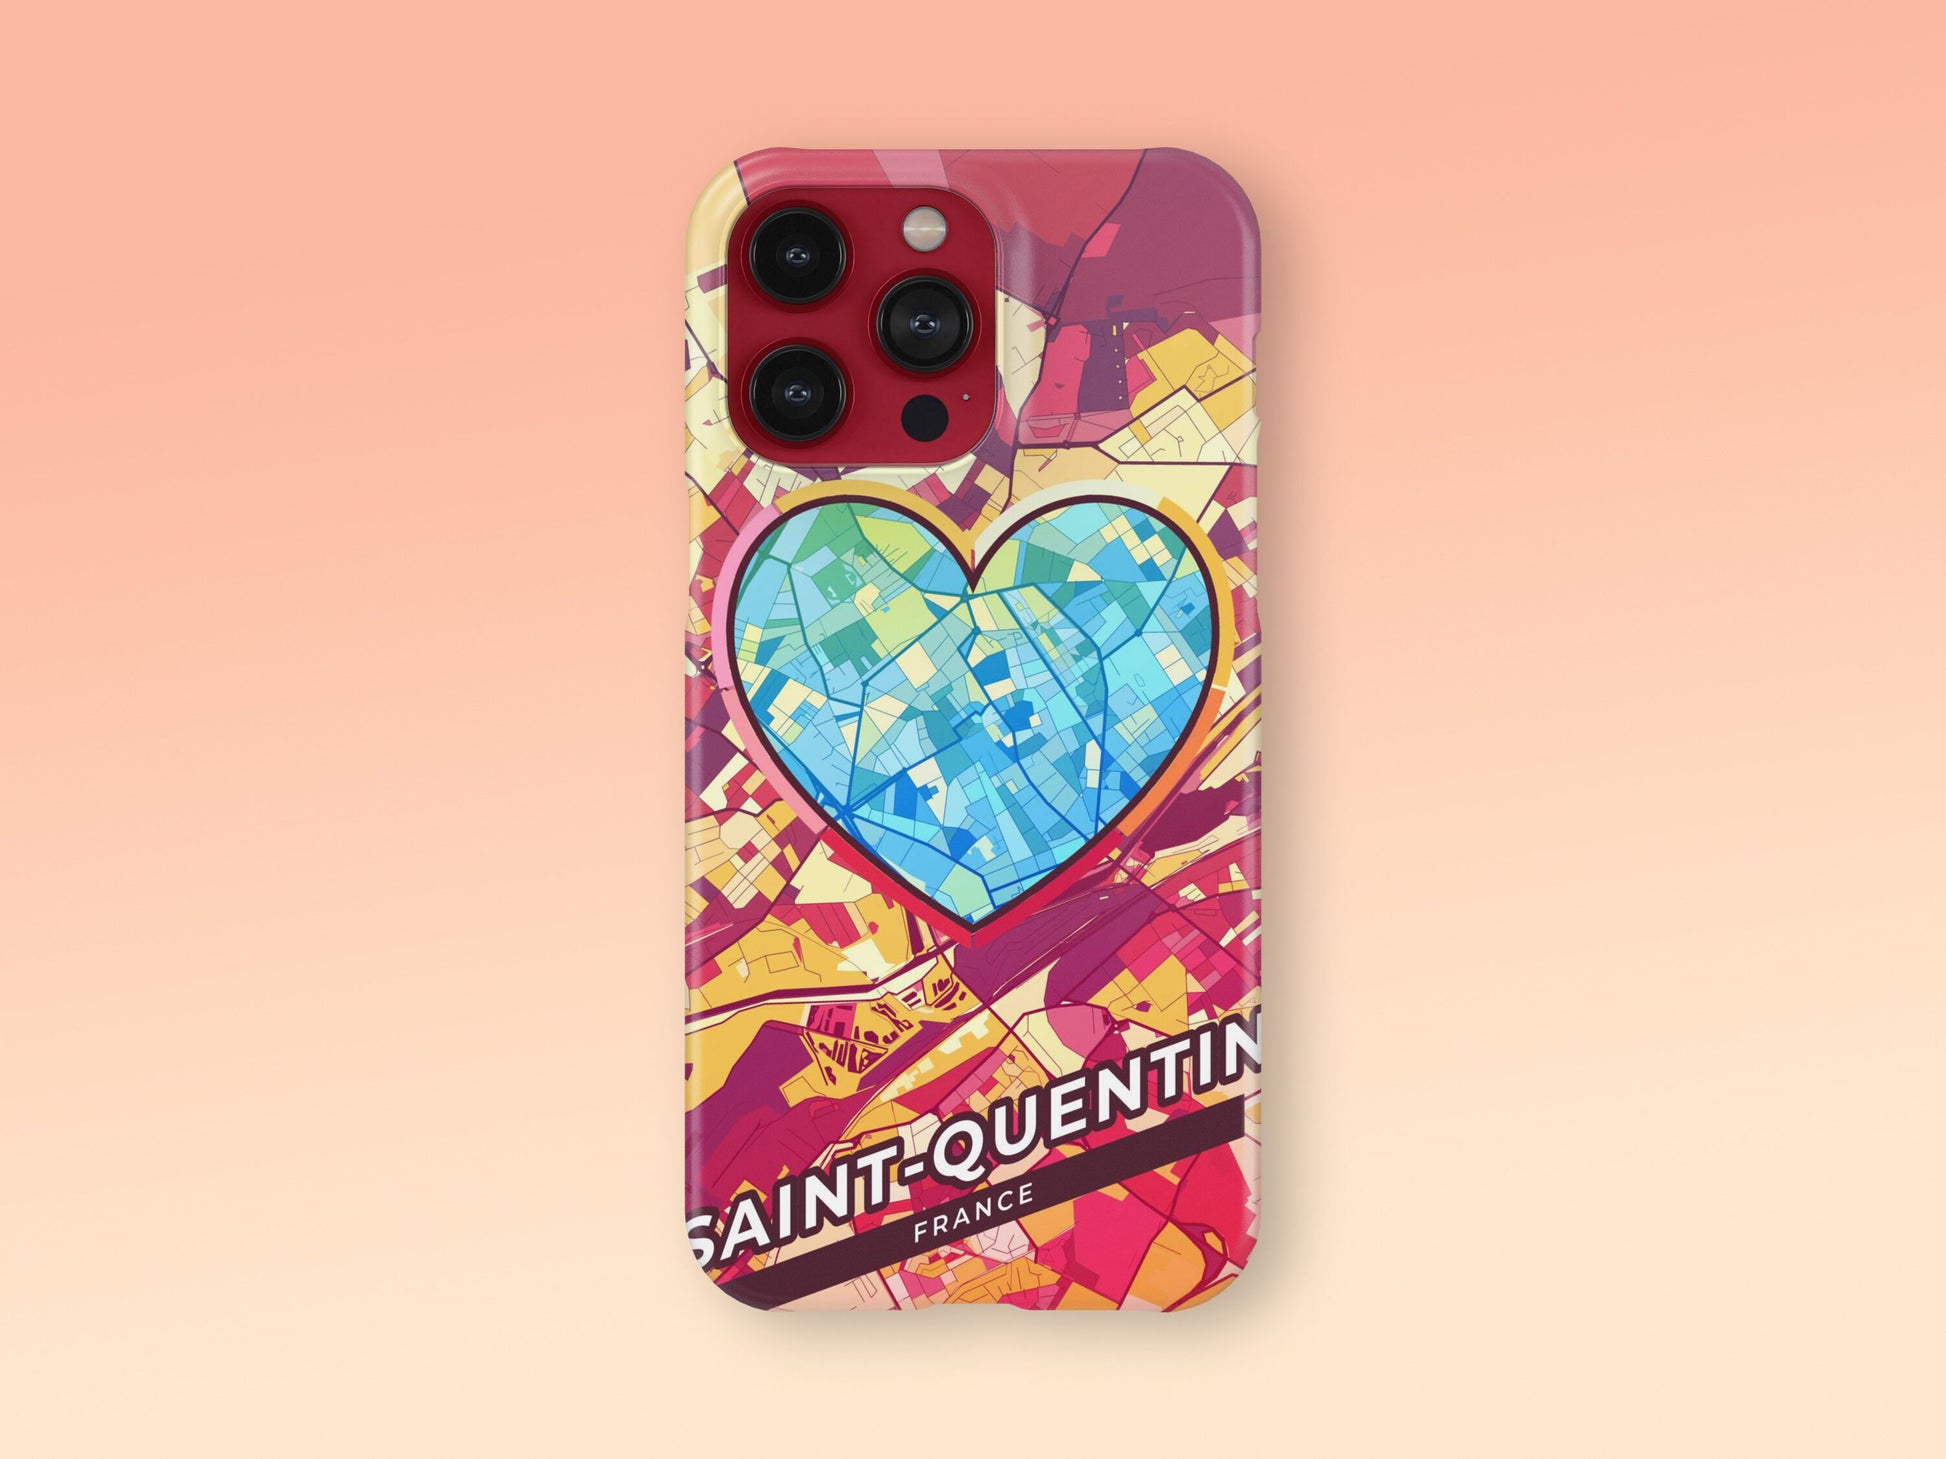 Saint-Quentin France slim phone case with colorful icon. Birthday, wedding or housewarming gift. Couple match cases. 2